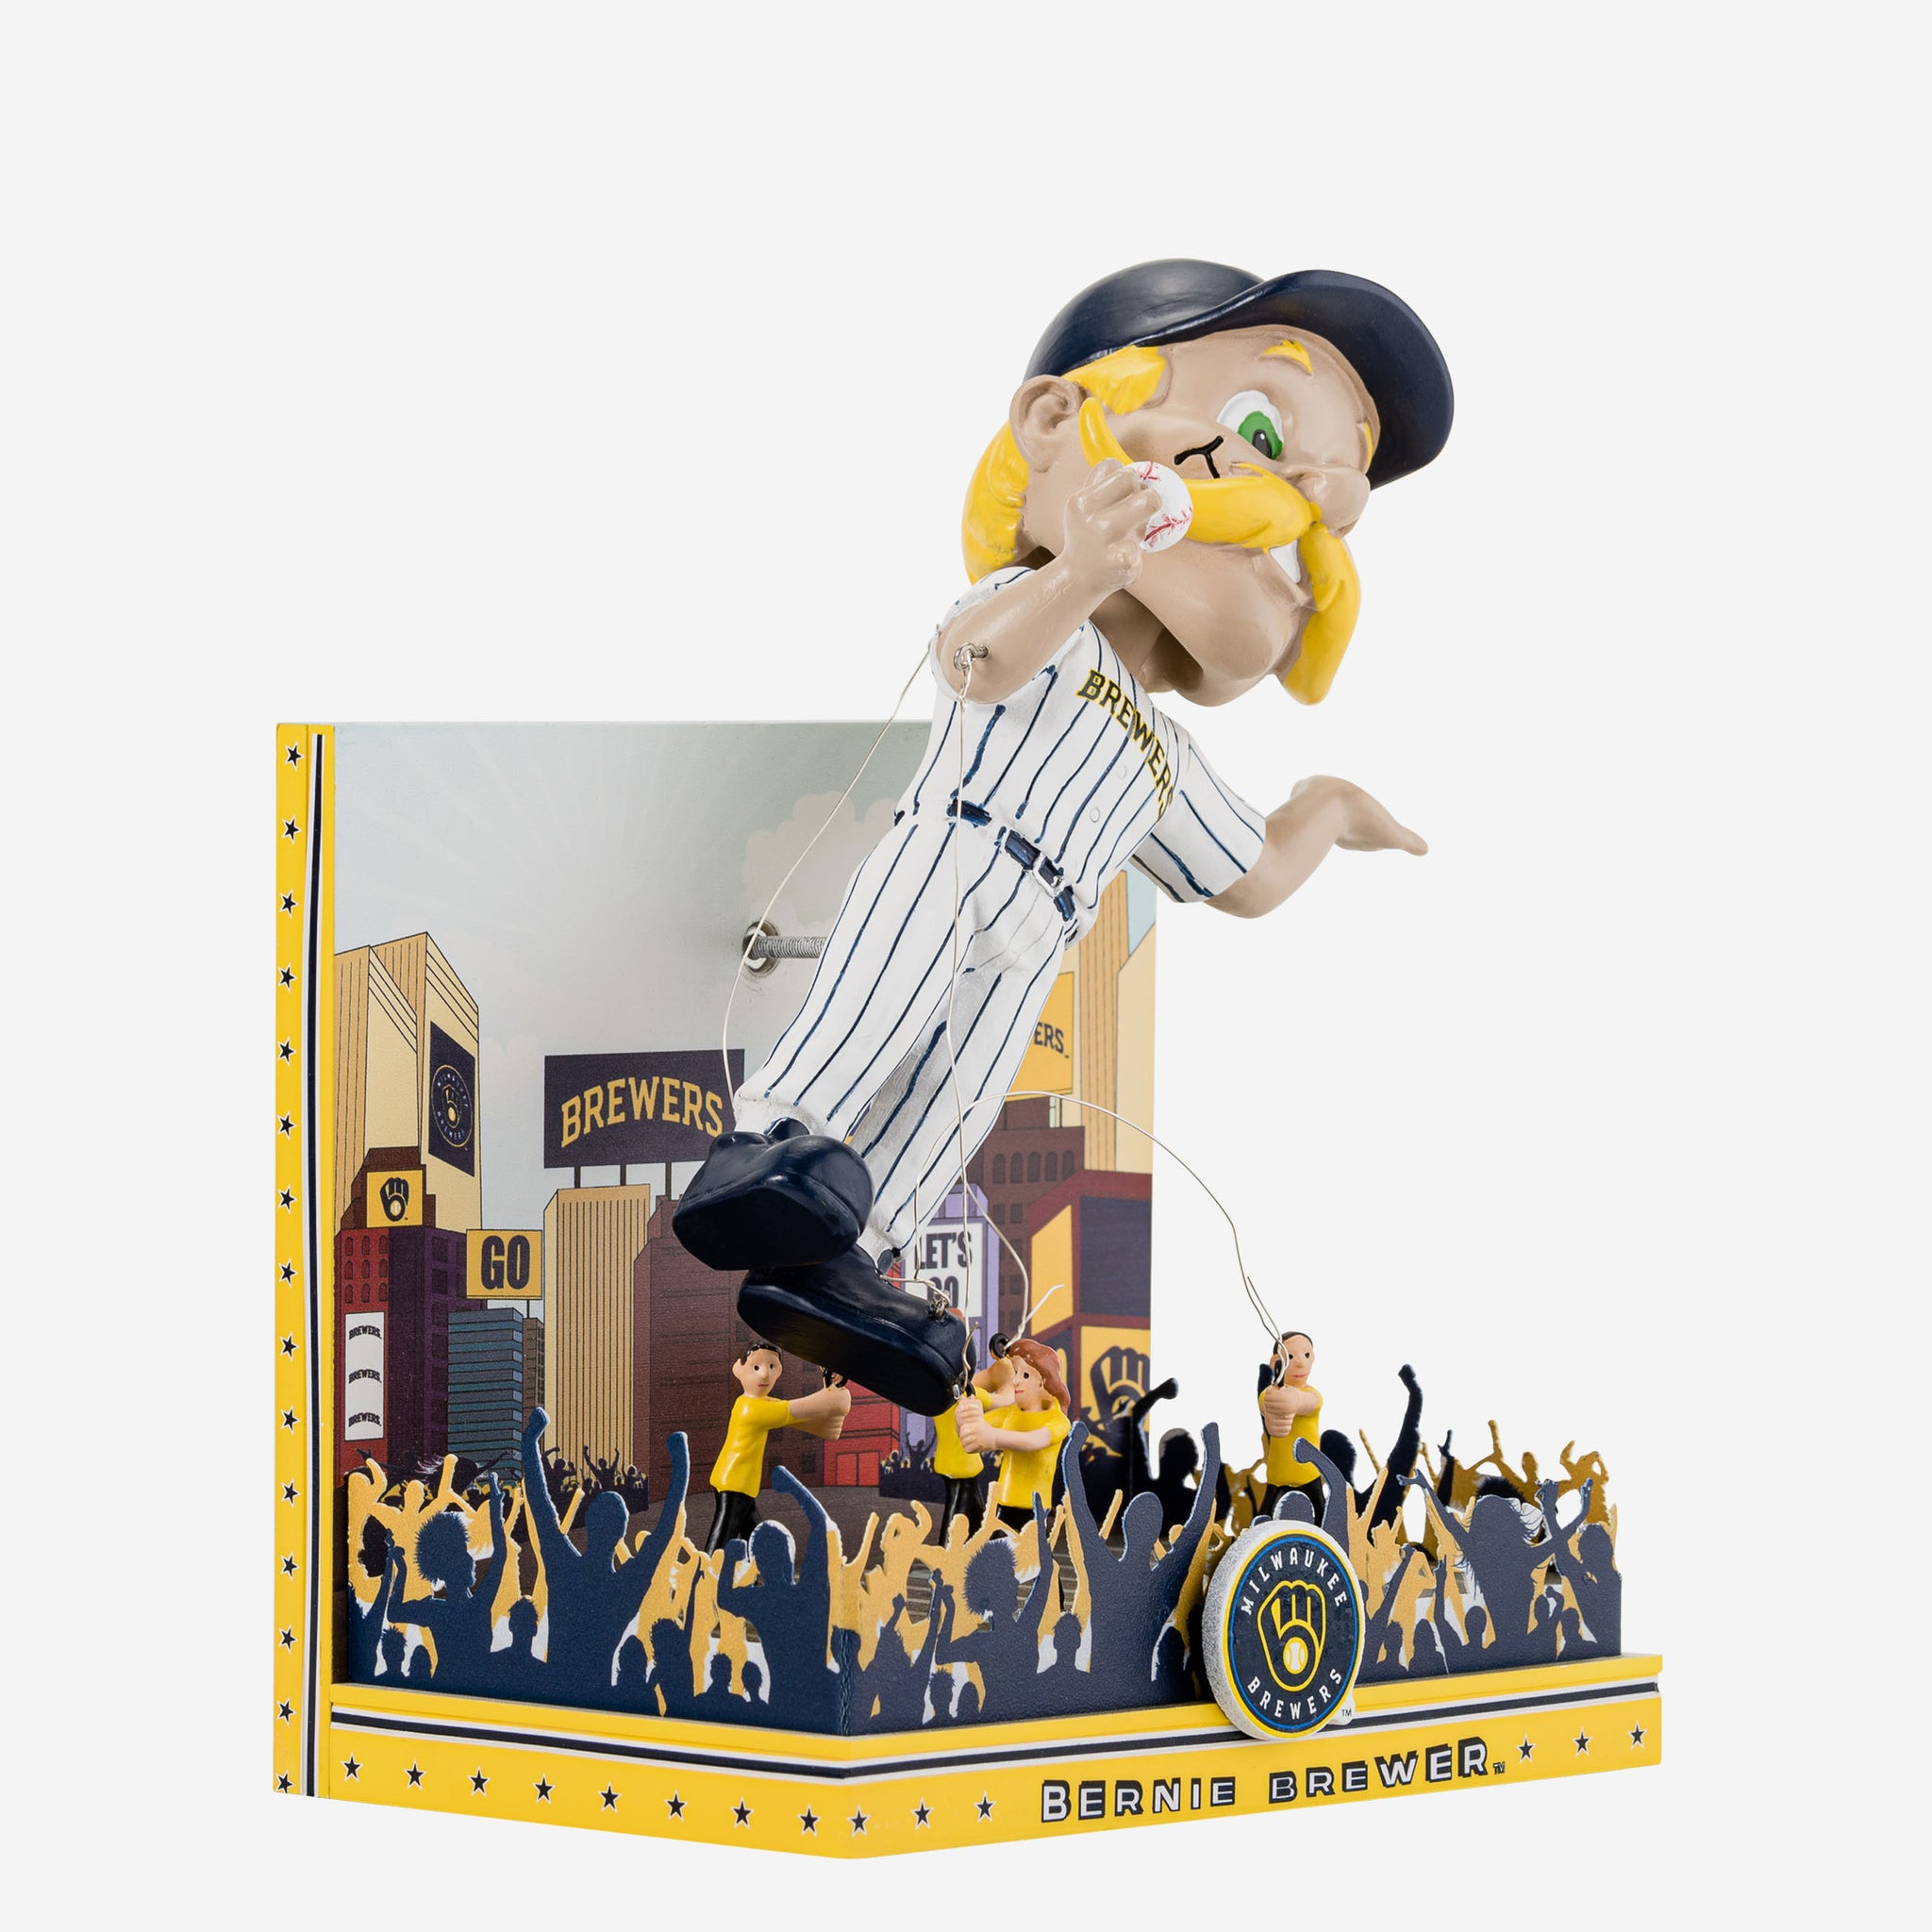 Bobbleheads, patriotic jerseys, and more: Brewers release 2023